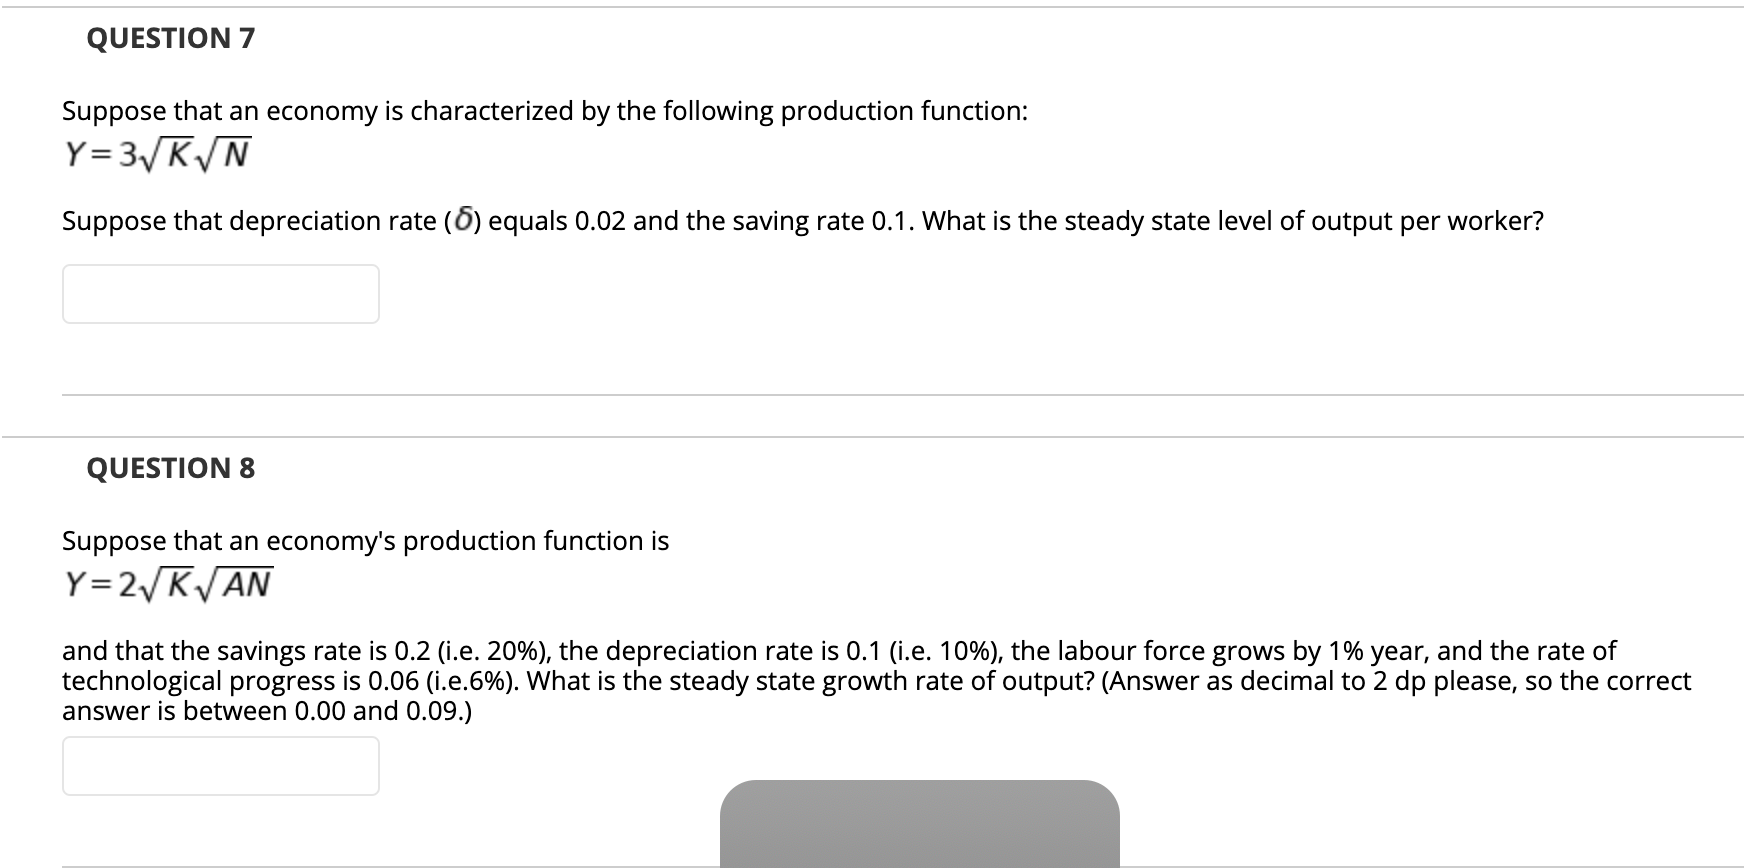 QUESTION 7
Suppose that an economy is characterized by the following production function:
Y= 3/K/N
Suppose that depreciation rate (6) equals 0.02 and the saving rate 0.1. What is the steady state level of output per worker?
